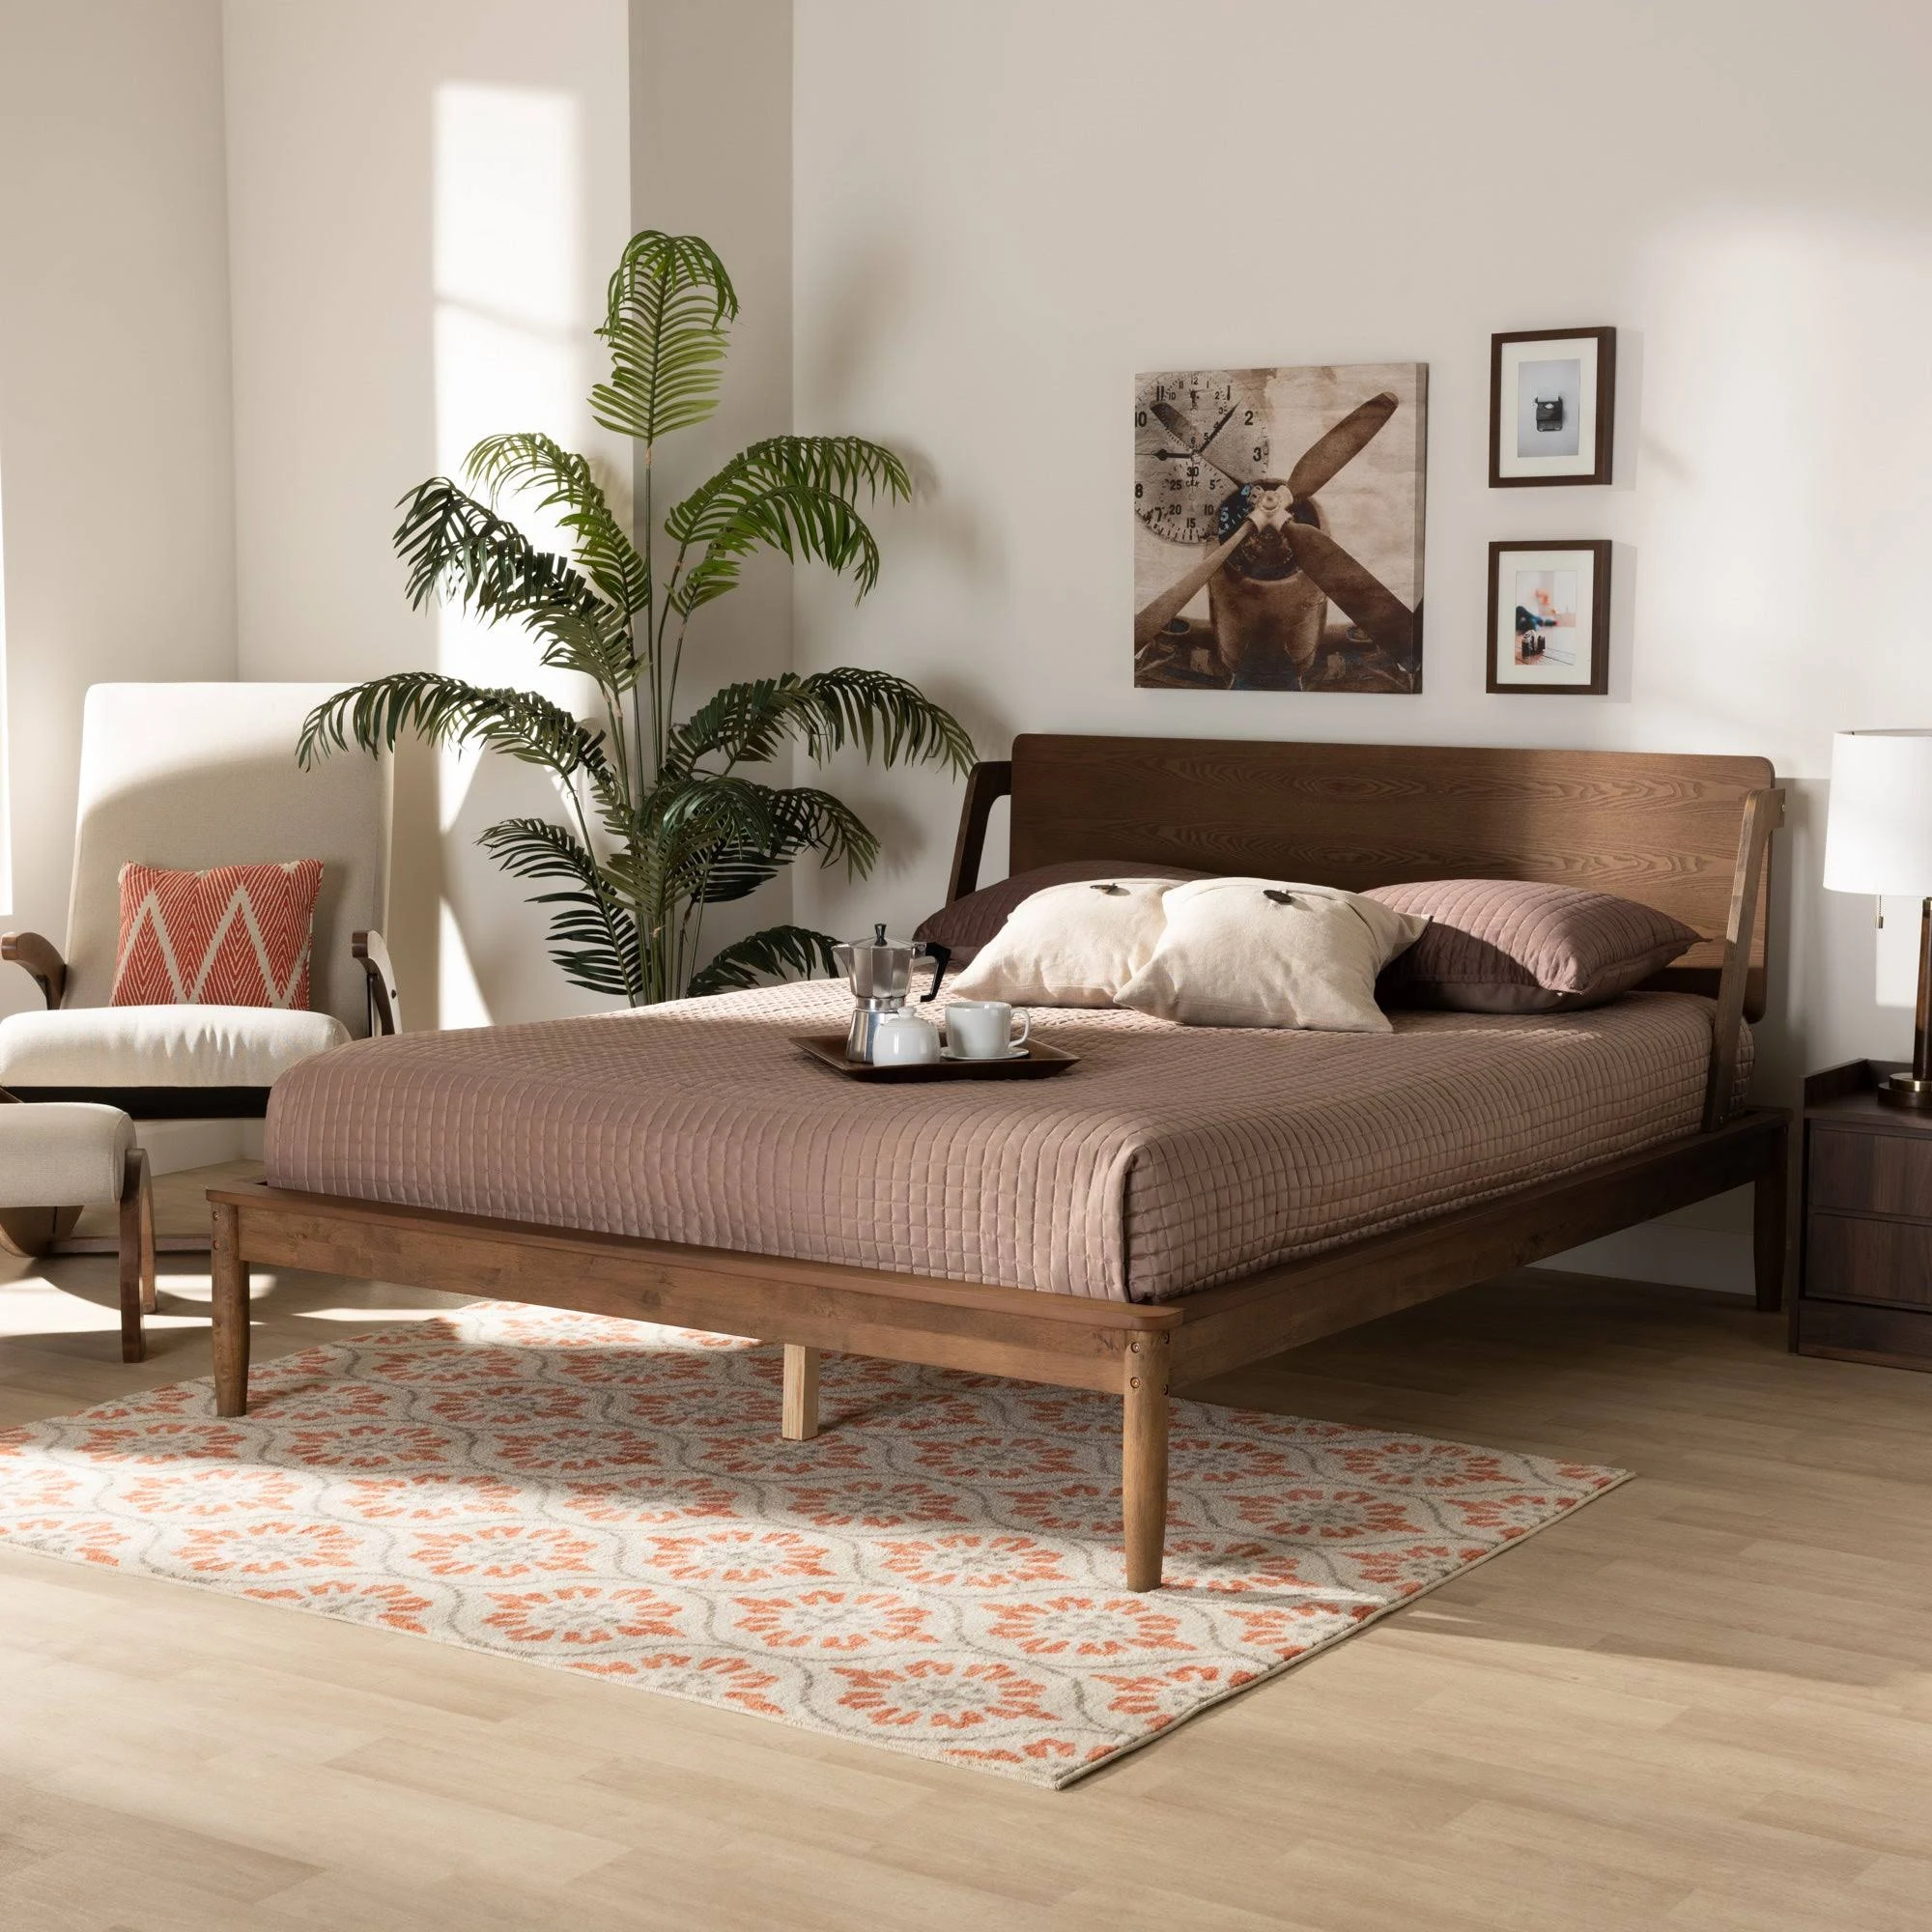 The 20 Best Mid Century Modern Bed Frames for Any Budget — Home ...